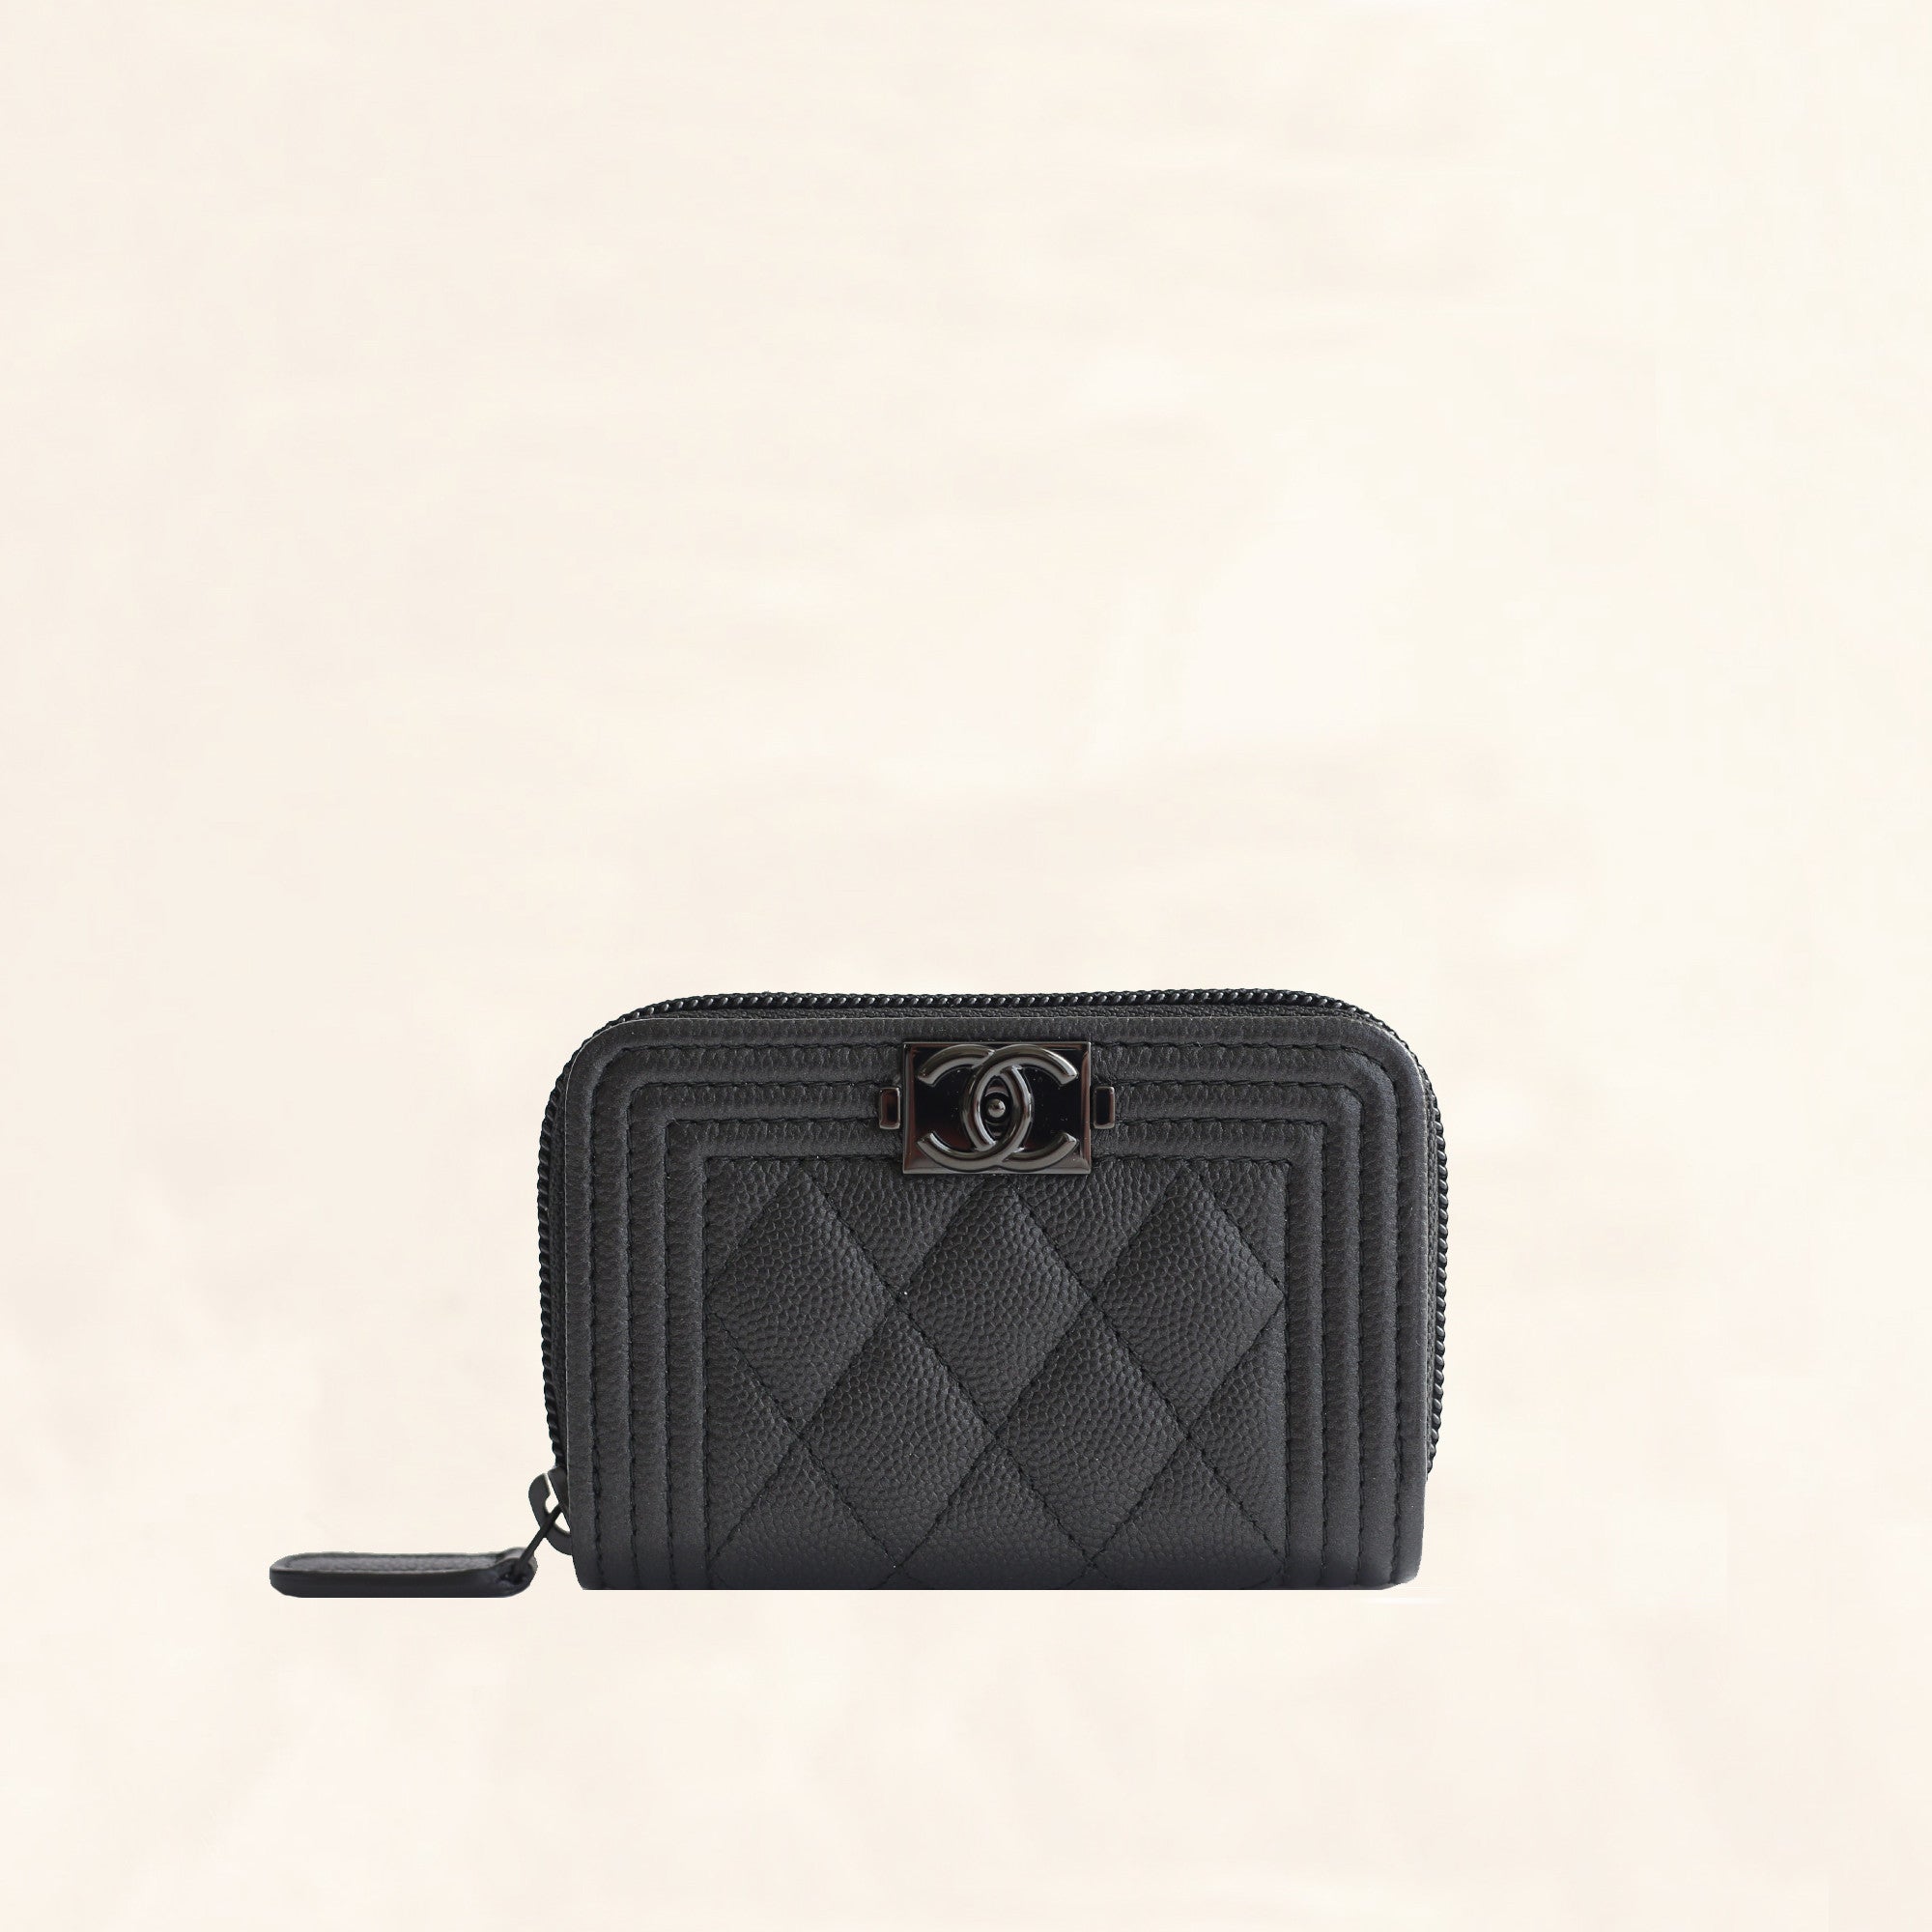 Chanel, Black, One Size